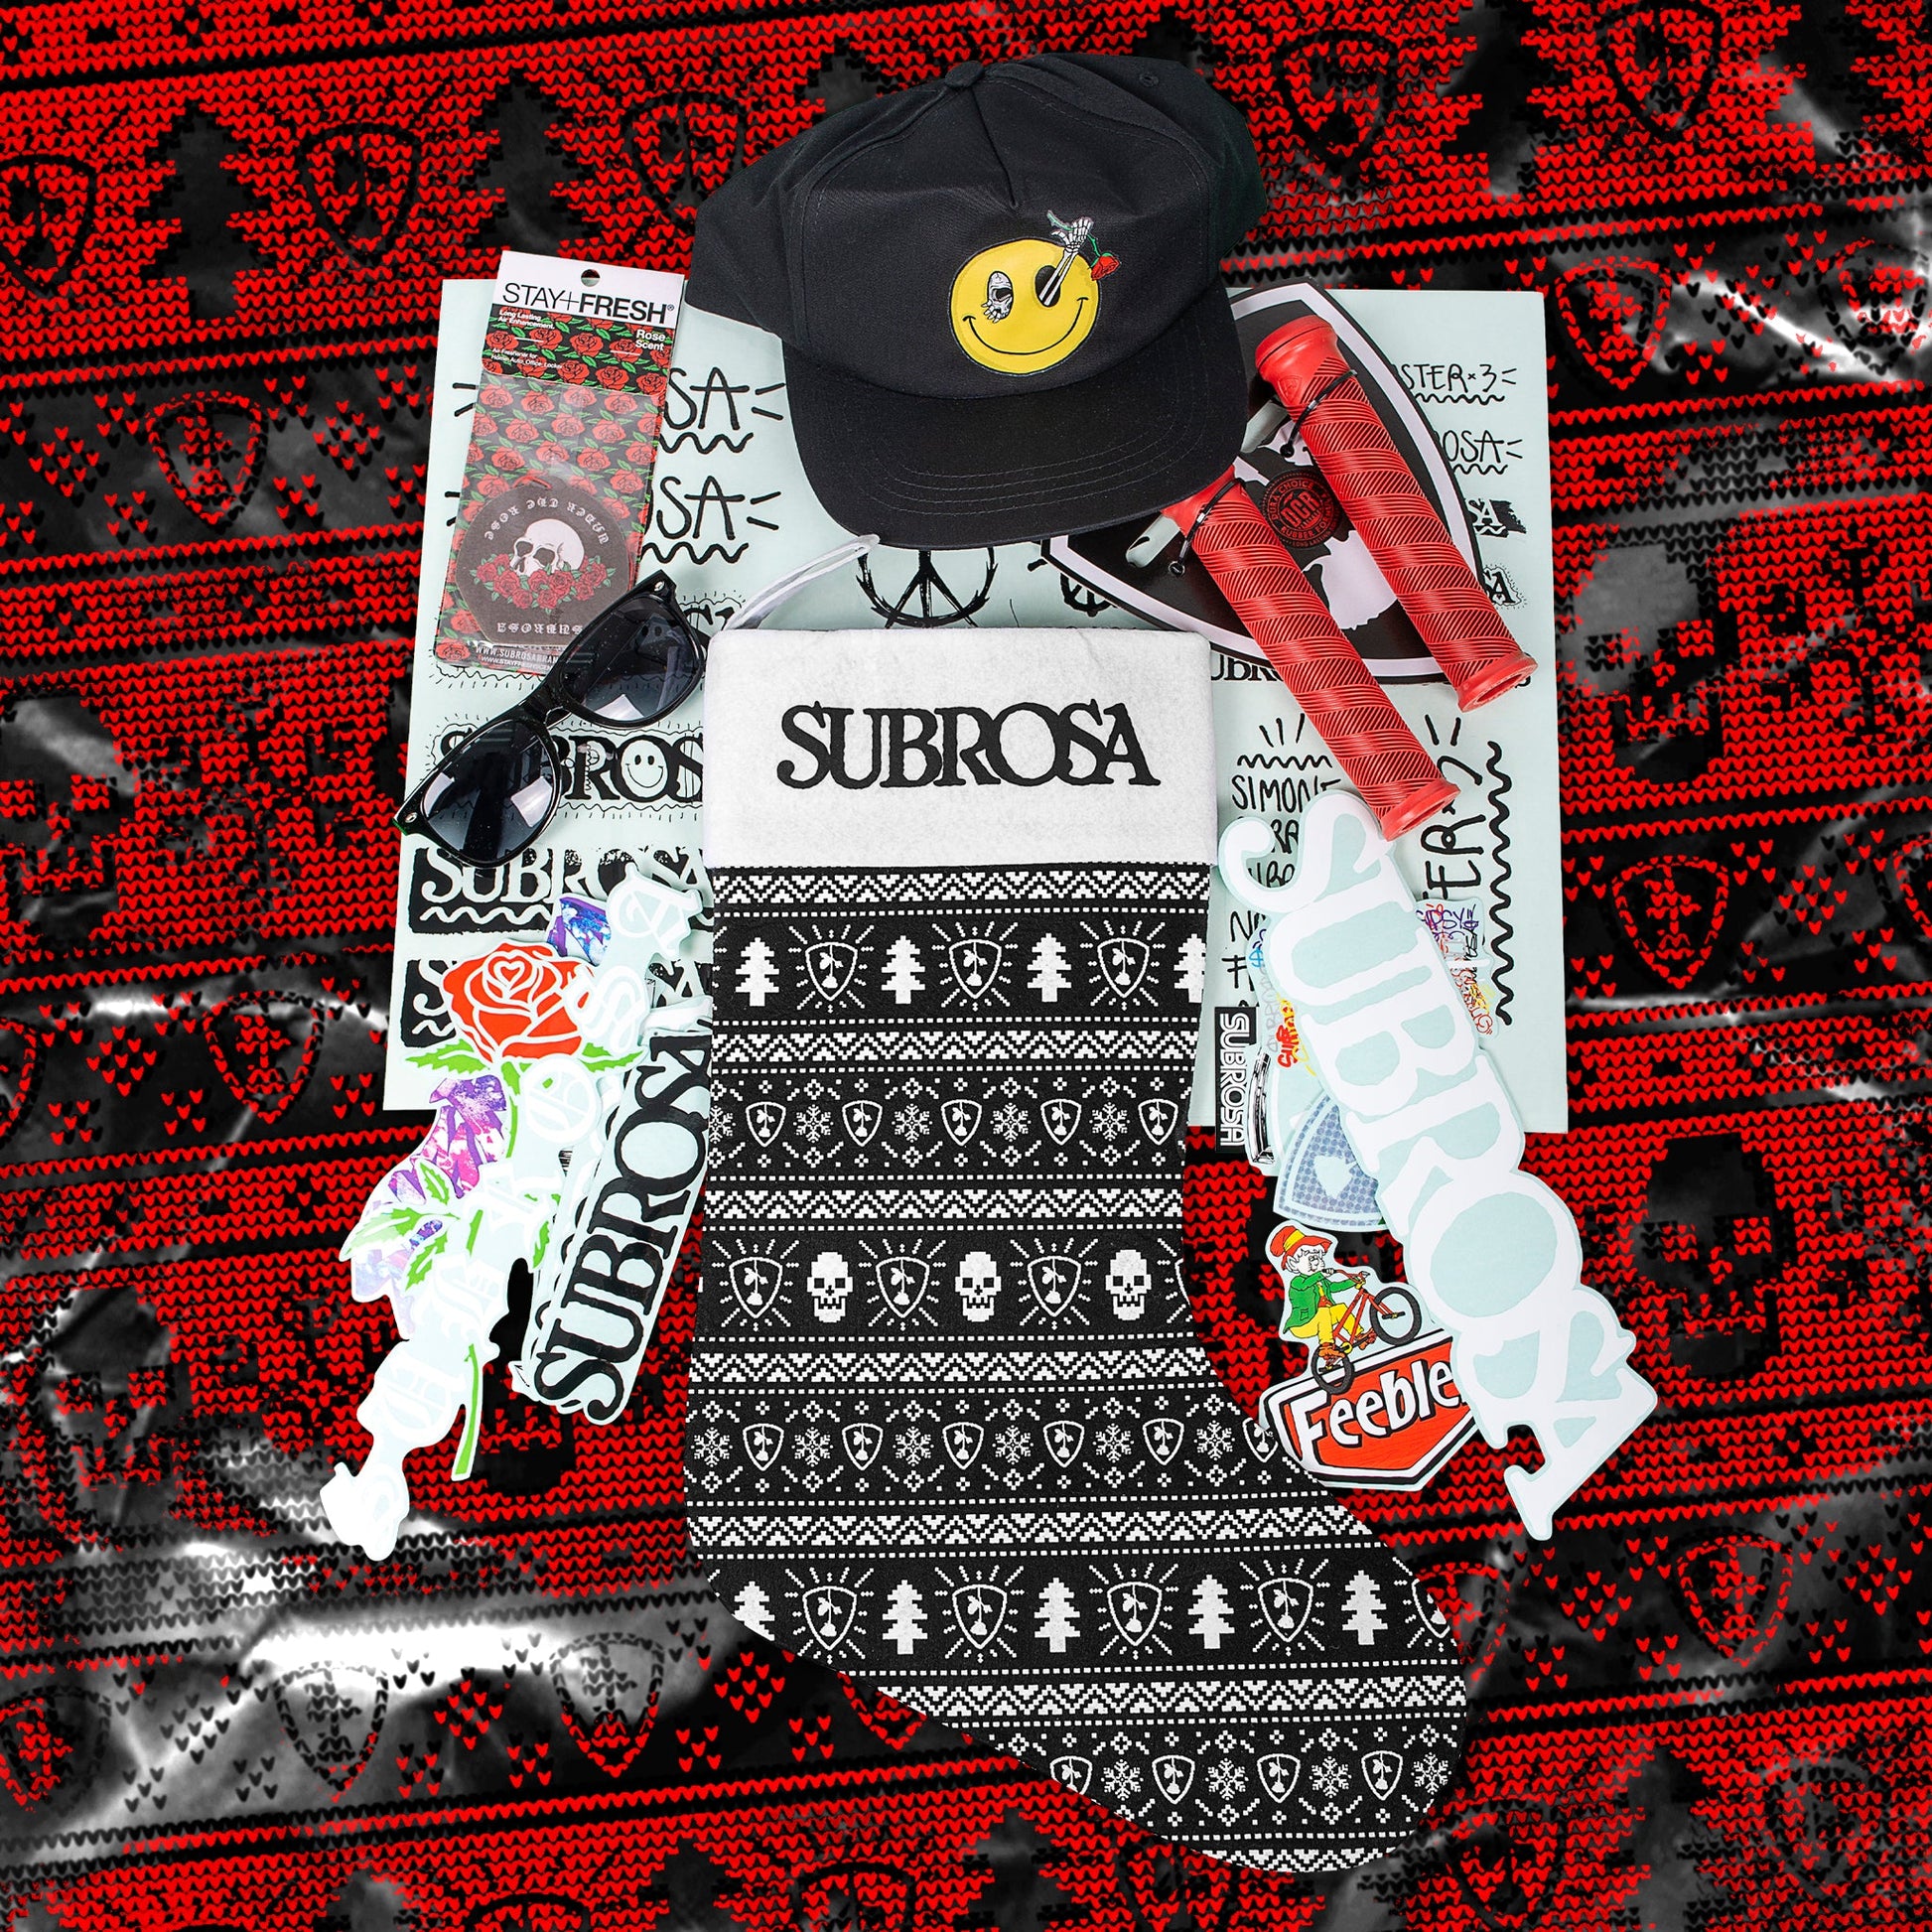 SUBROSA X-Mas Stocking - Sparkys Brands Sparkys Brands  Merch, Subrosa Brand bmx pro quality freestyle bicycle